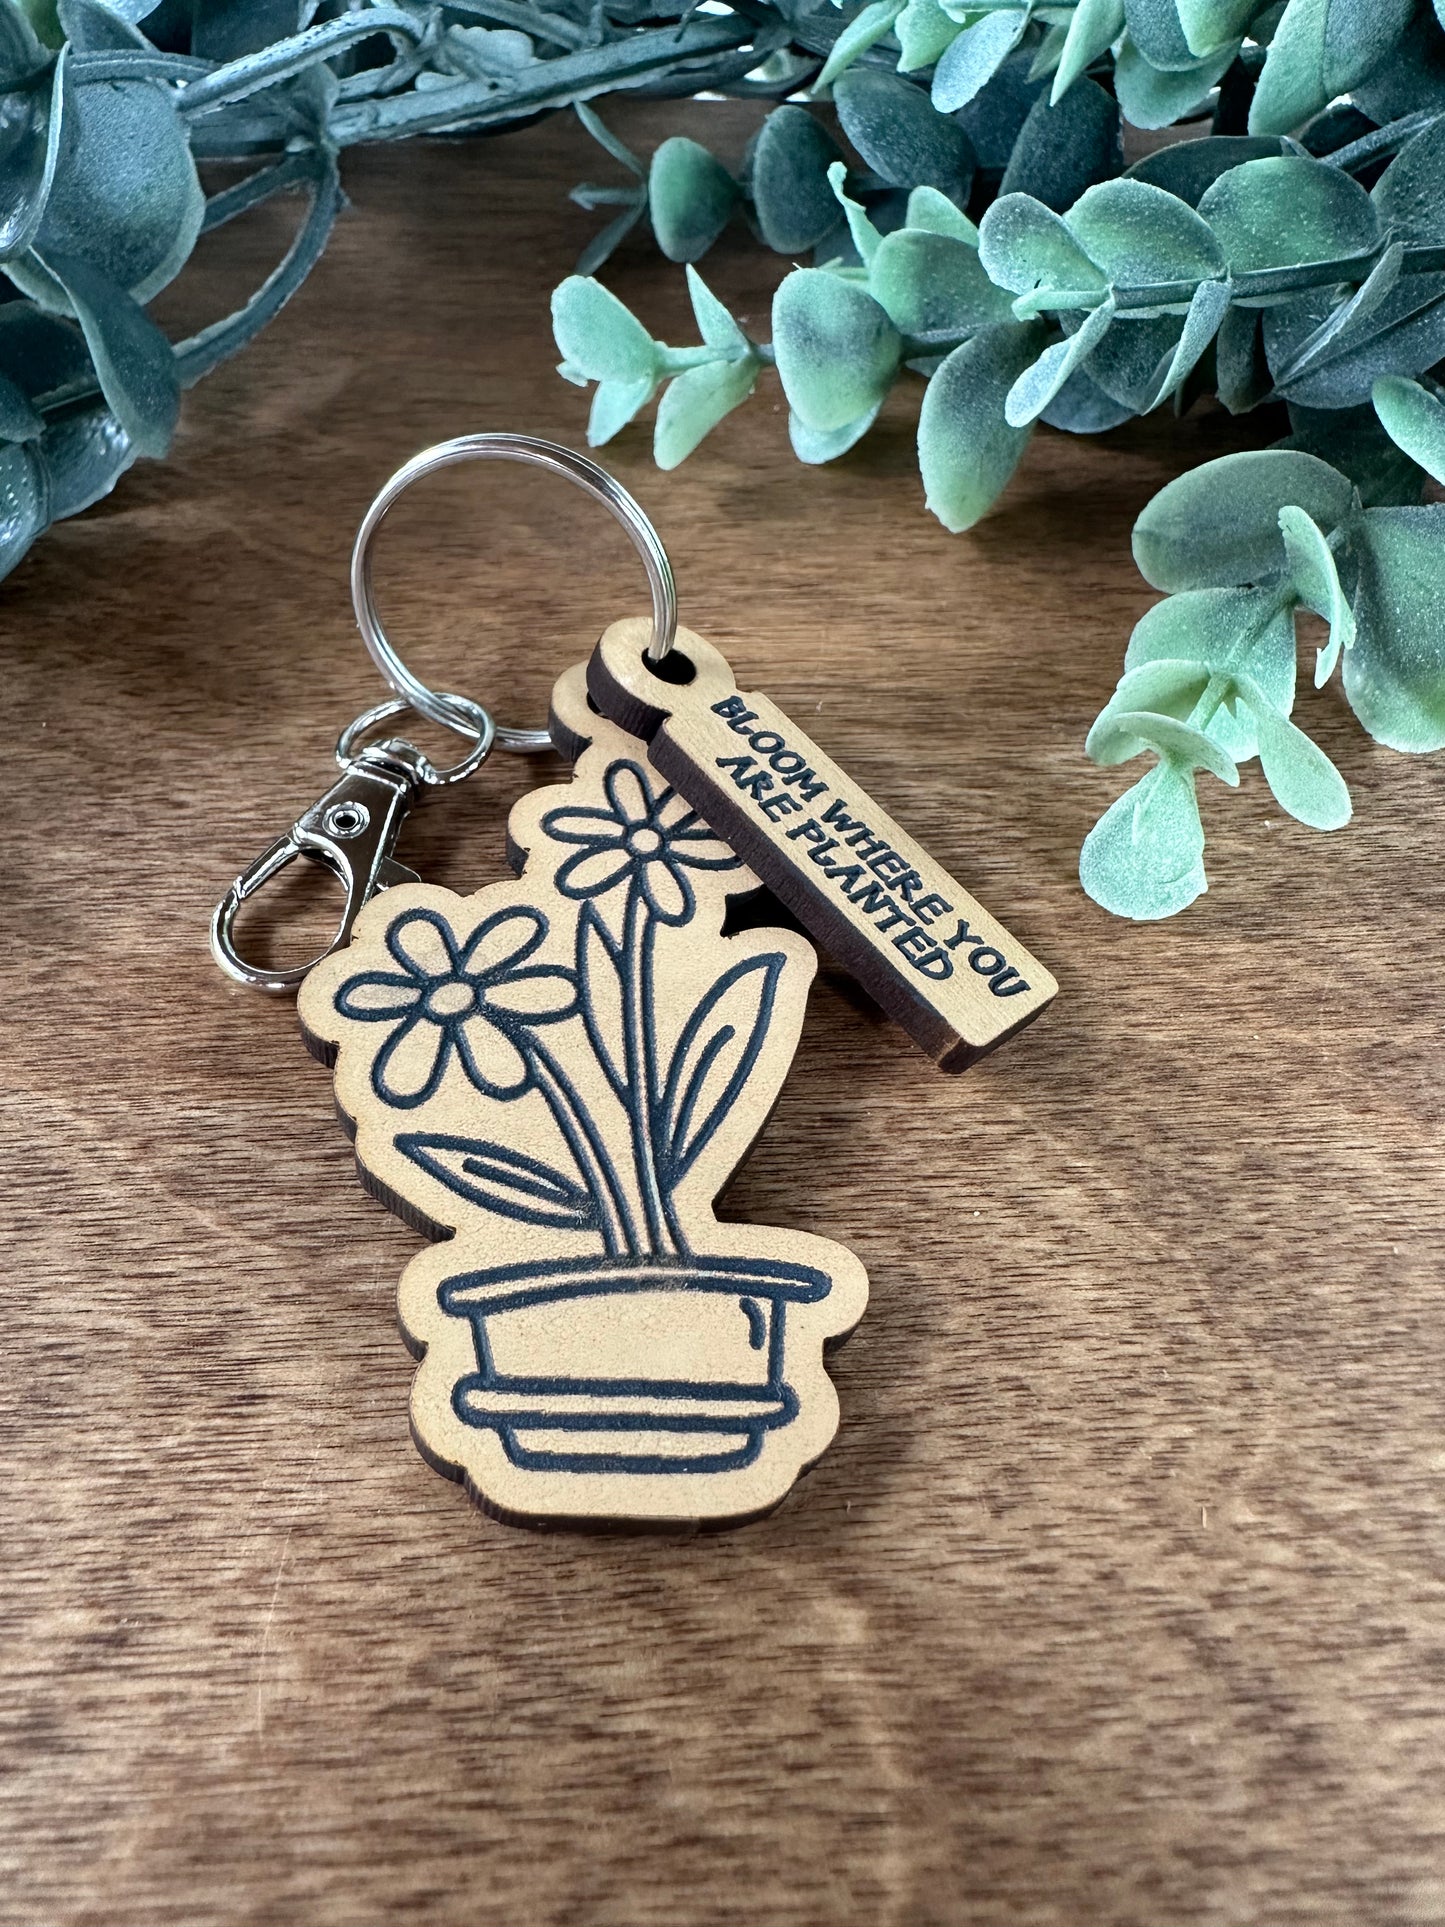 "Bloom Where You Are Planted" Flowerpot Keychain